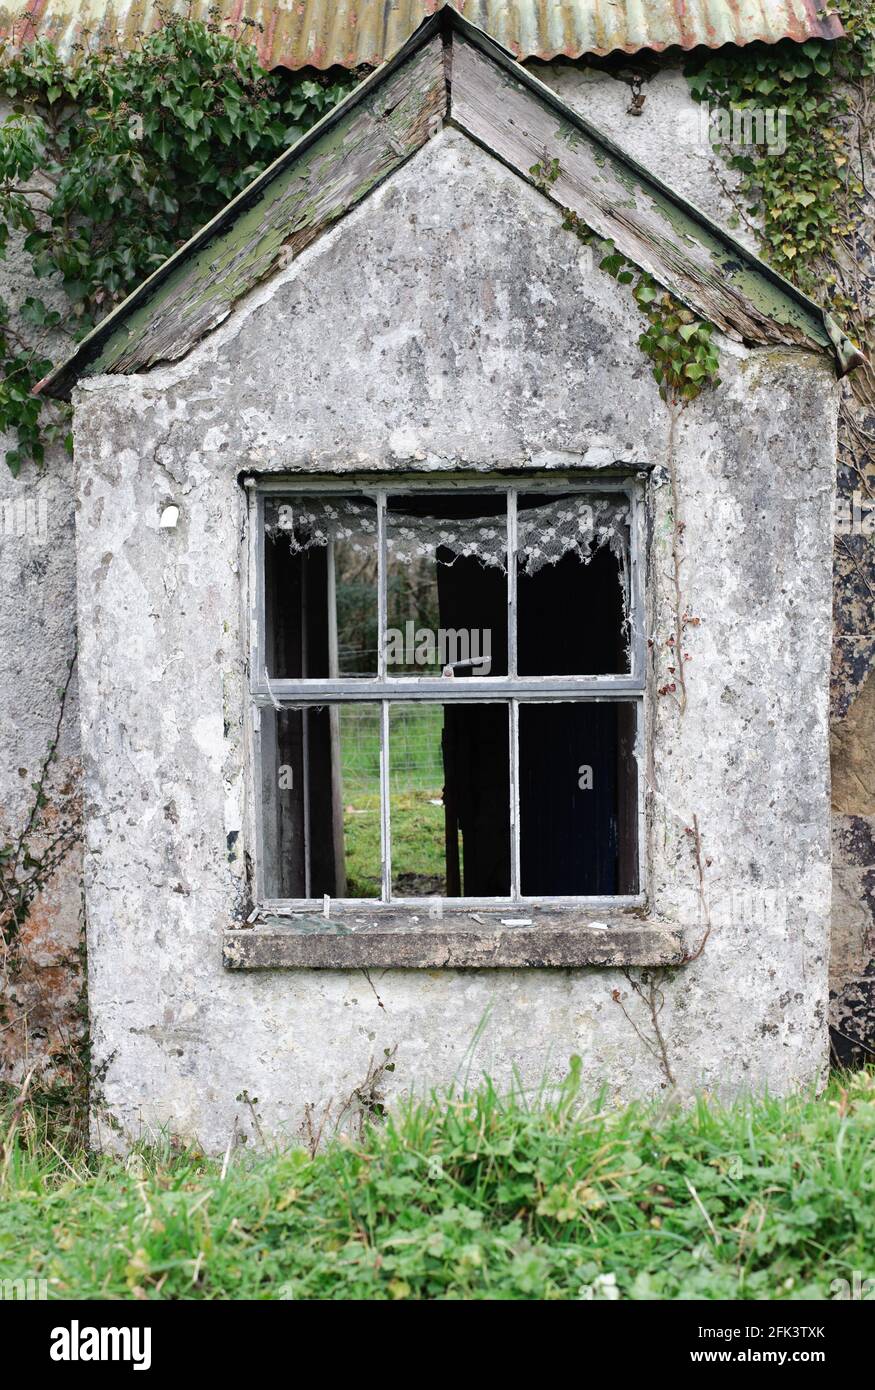 Abandoned house in the country, Co. Cavan, Ireland Stock Photo